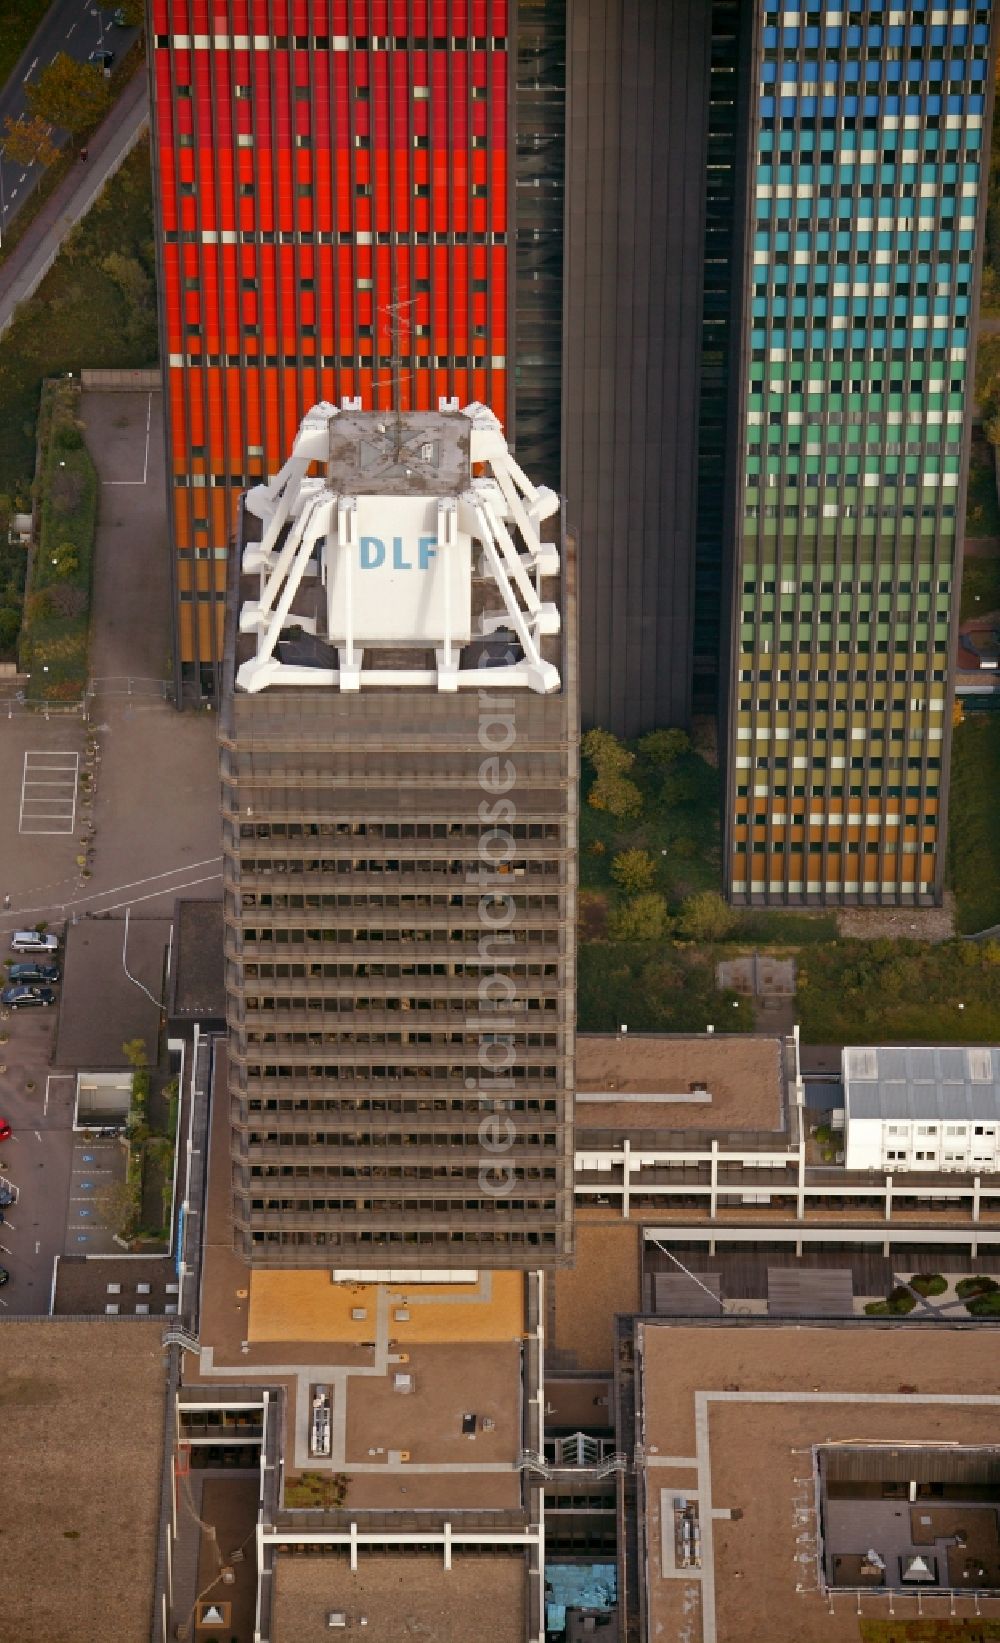 Aerial image Köln - High-rise buildings of the ensemble of the media it Germany (DLF) and Deutsche Welle in North Rhine-Westphalia (NRW)